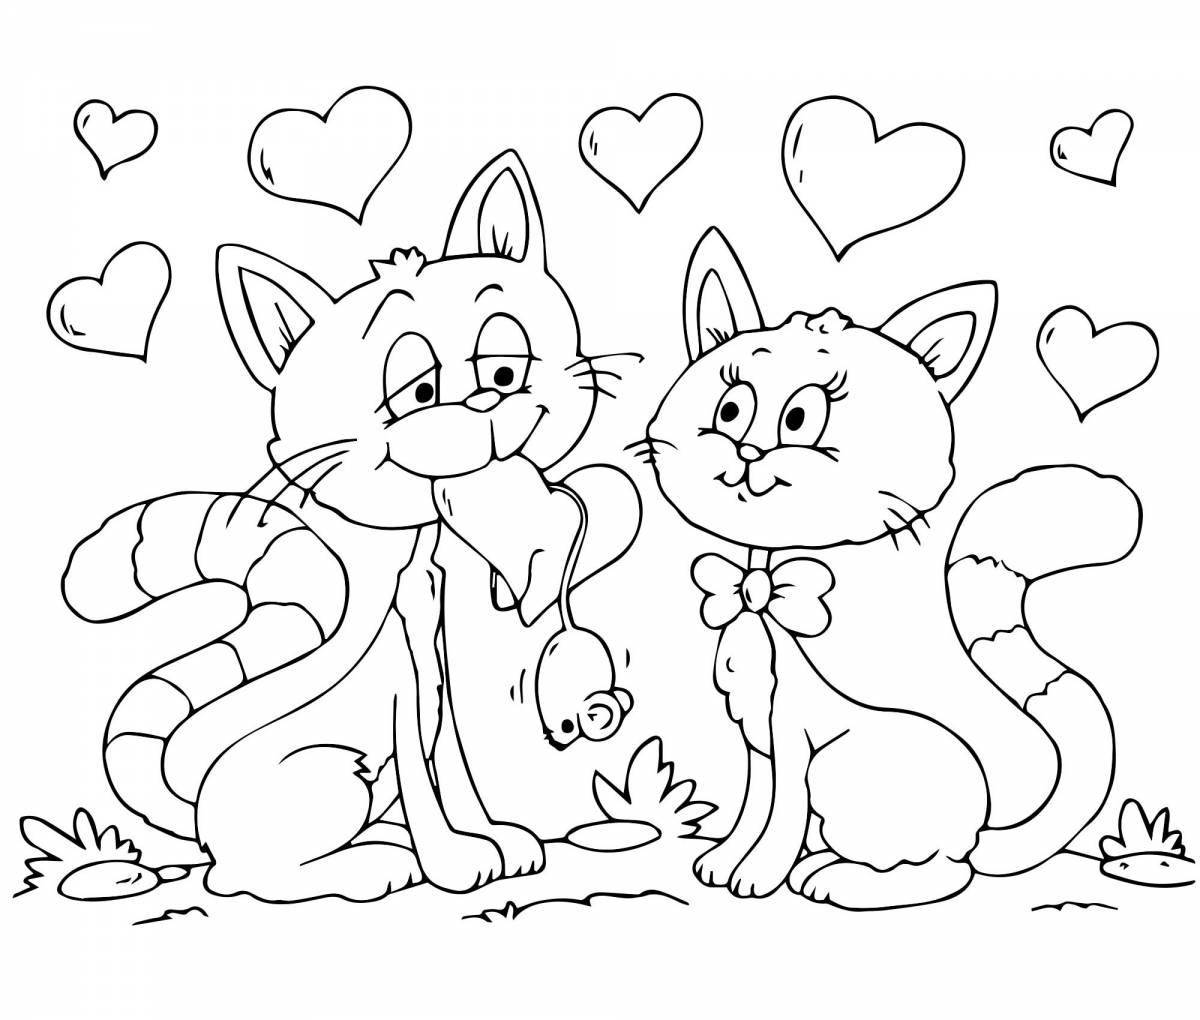 Valentine's Day coloring book